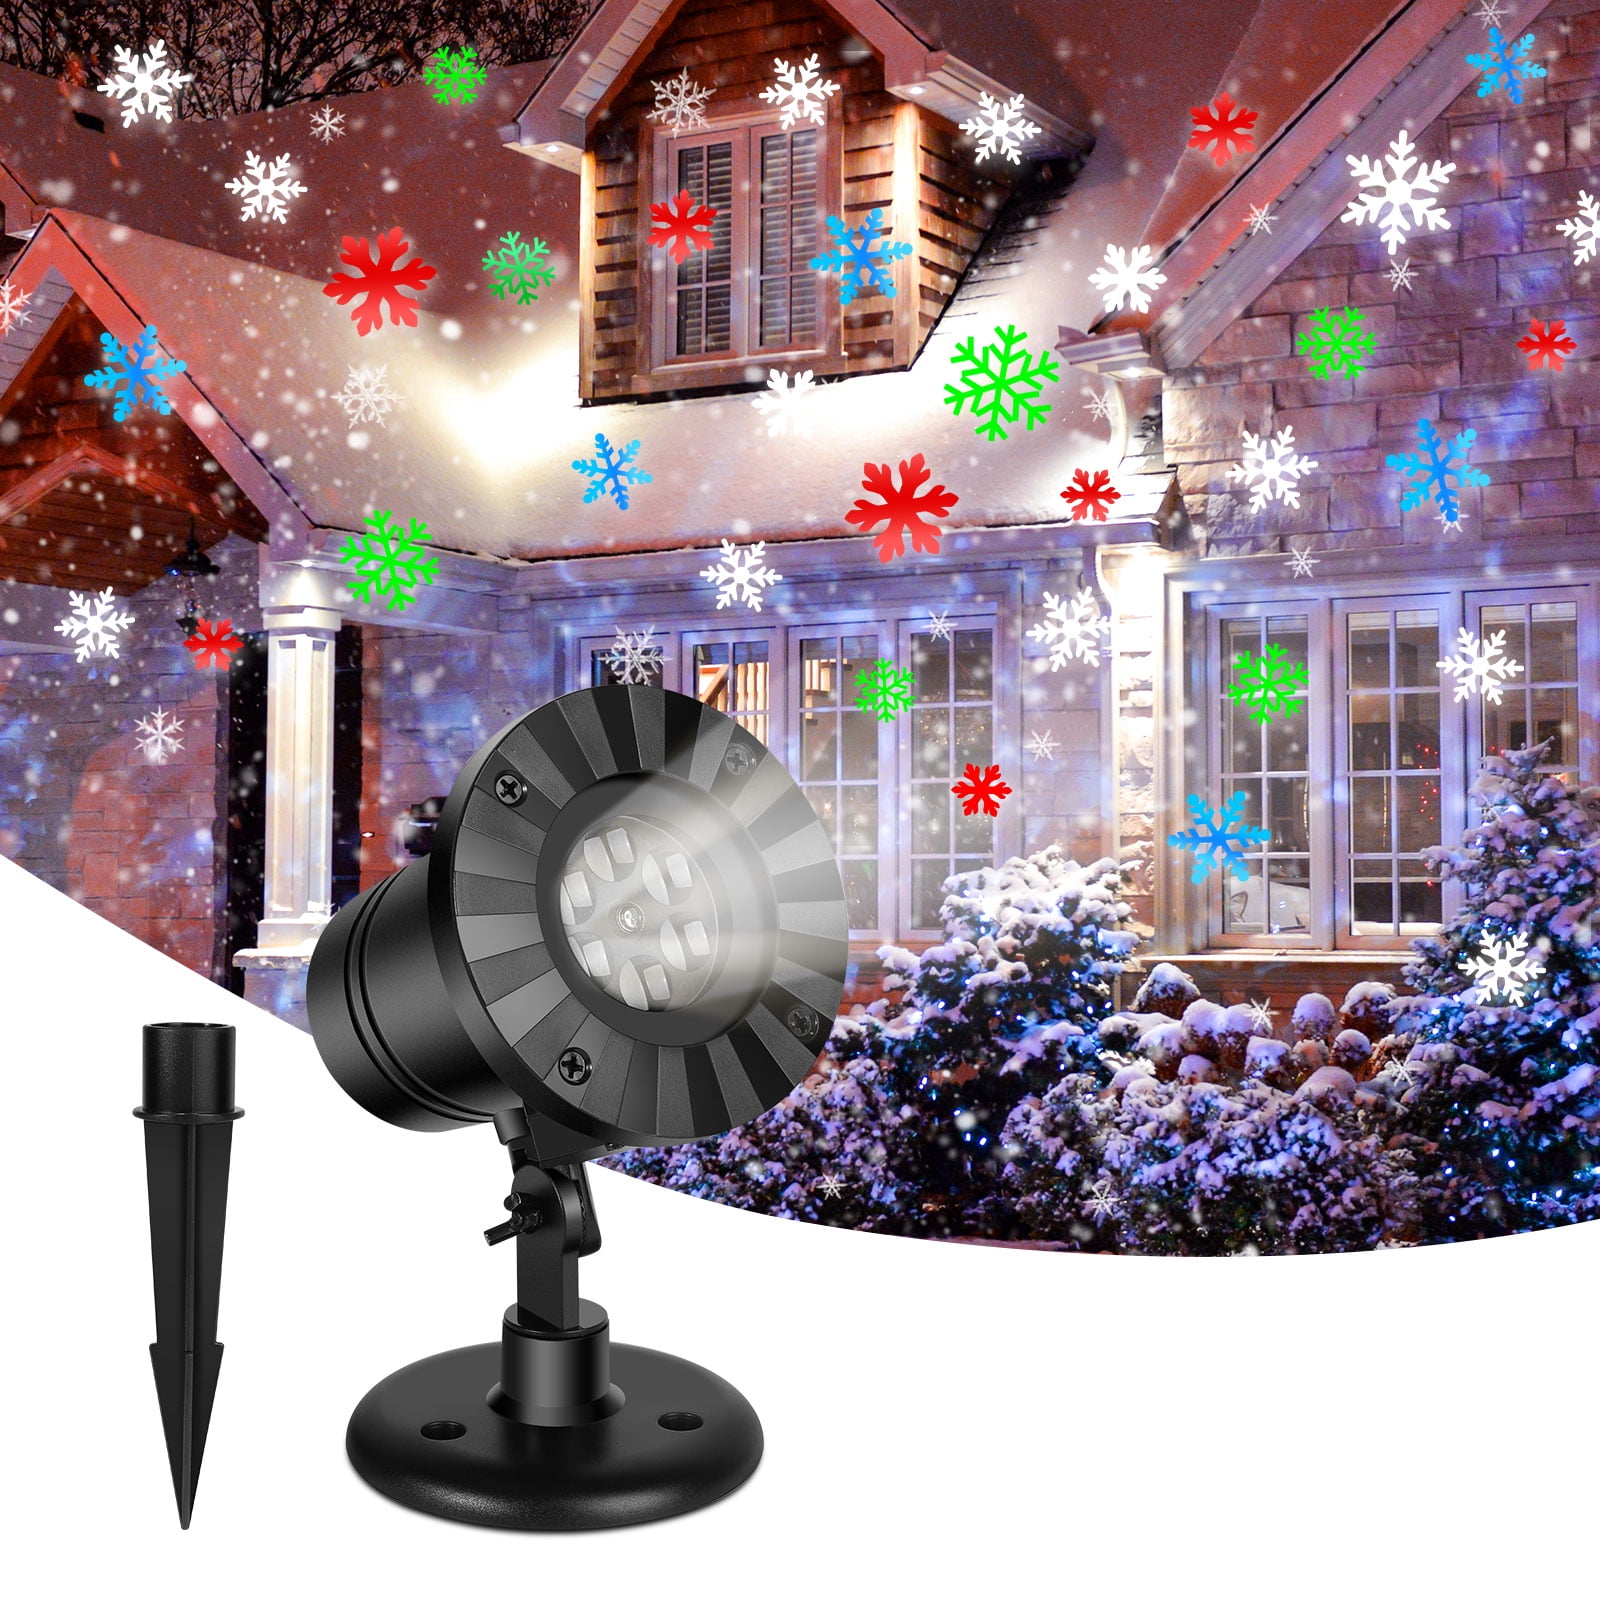 Snowflakes Projector Lights